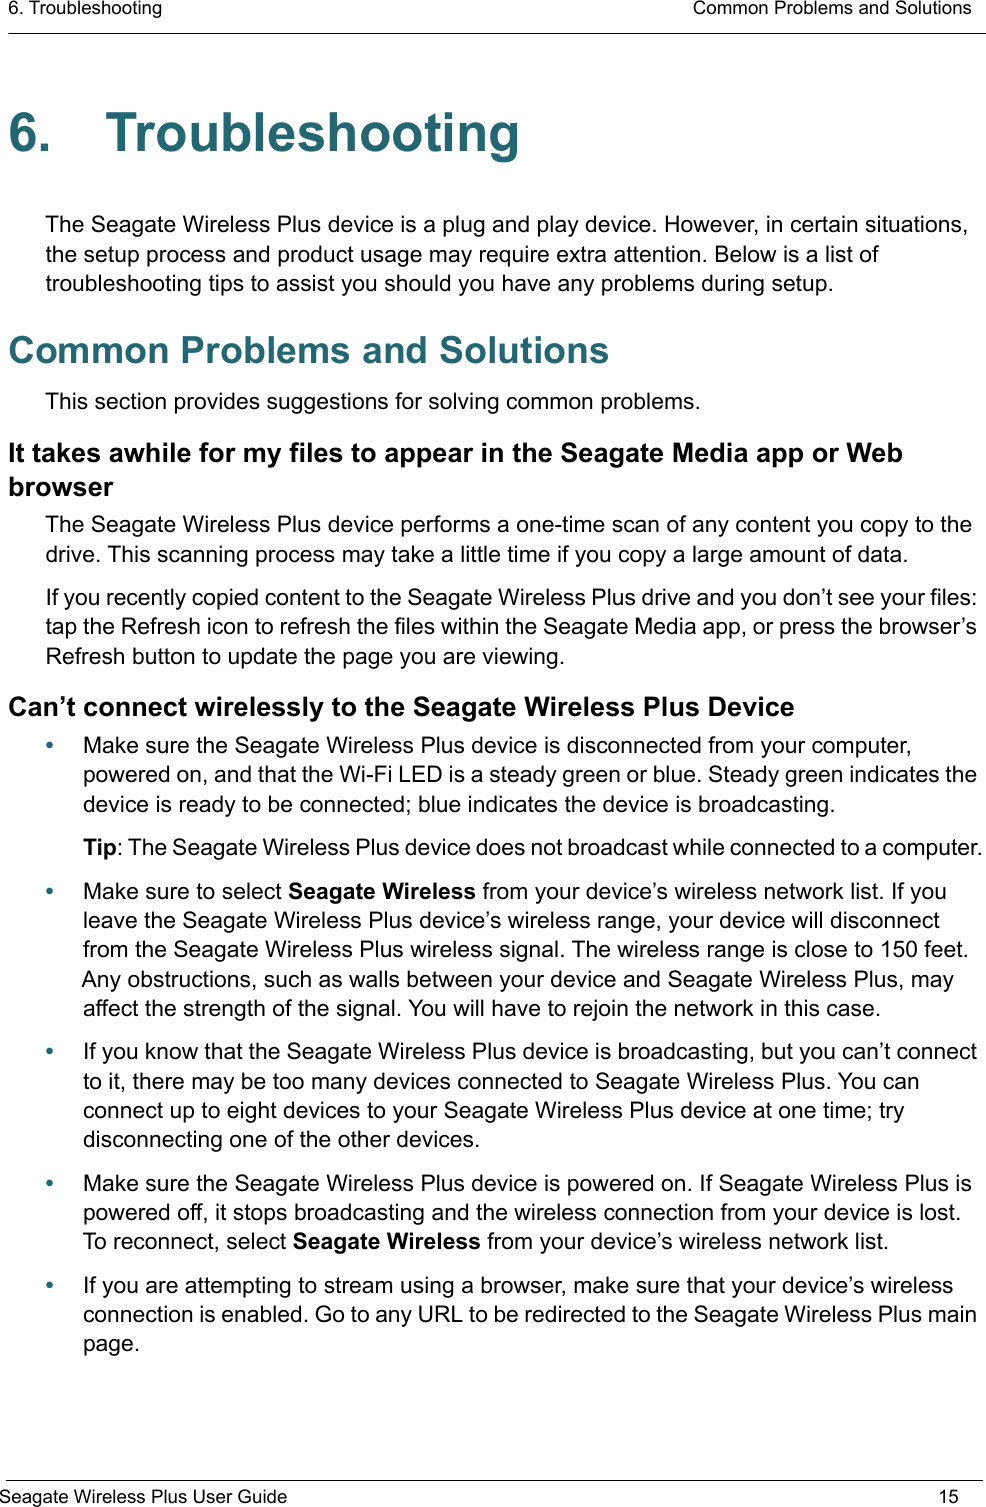 6. Troubleshooting  Common Problems and SolutionsSeagate Wireless Plus User Guide 156. TroubleshootingThe Seagate Wireless Plus device is a plug and play device. However, in certain situations, the setup process and product usage may require extra attention. Below is a list of troubleshooting tips to assist you should you have any problems during setup.Common Problems and SolutionsThis section provides suggestions for solving common problems.It takes awhile for my files to appear in the Seagate Media app or Web browserThe Seagate Wireless Plus device performs a one-time scan of any content you copy to the drive. This scanning process may take a little time if you copy a large amount of data.If you recently copied content to the Seagate Wireless Plus drive and you don’t see your files: tap the Refresh icon to refresh the files within the Seagate Media app, or press the browser’s Refresh button to update the page you are viewing.Can’t connect wirelessly to the Seagate Wireless Plus Device•Make sure the Seagate Wireless Plus device is disconnected from your computer, powered on, and that the Wi-Fi LED is a steady green or blue. Steady green indicates the device is ready to be connected; blue indicates the device is broadcasting. Tip: The Seagate Wireless Plus device does not broadcast while connected to a computer.•Make sure to select Seagate Wireless from your device’s wireless network list. If you leave the Seagate Wireless Plus device’s wireless range, your device will disconnect from the Seagate Wireless Plus wireless signal. The wireless range is close to 150 feet. Any obstructions, such as walls between your device and Seagate Wireless Plus, may affect the strength of the signal. You will have to rejoin the network in this case.•If you know that the Seagate Wireless Plus device is broadcasting, but you can’t connect to it, there may be too many devices connected to Seagate Wireless Plus. You can connect up to eight devices to your Seagate Wireless Plus device at one time; try disconnecting one of the other devices.•Make sure the Seagate Wireless Plus device is powered on. If Seagate Wireless Plus is powered off, it stops broadcasting and the wireless connection from your device is lost. To reconnect, select Seagate Wireless from your device’s wireless network list.•If you are attempting to stream using a browser, make sure that your device’s wireless connection is enabled. Go to any URL to be redirected to the Seagate Wireless Plus main page.